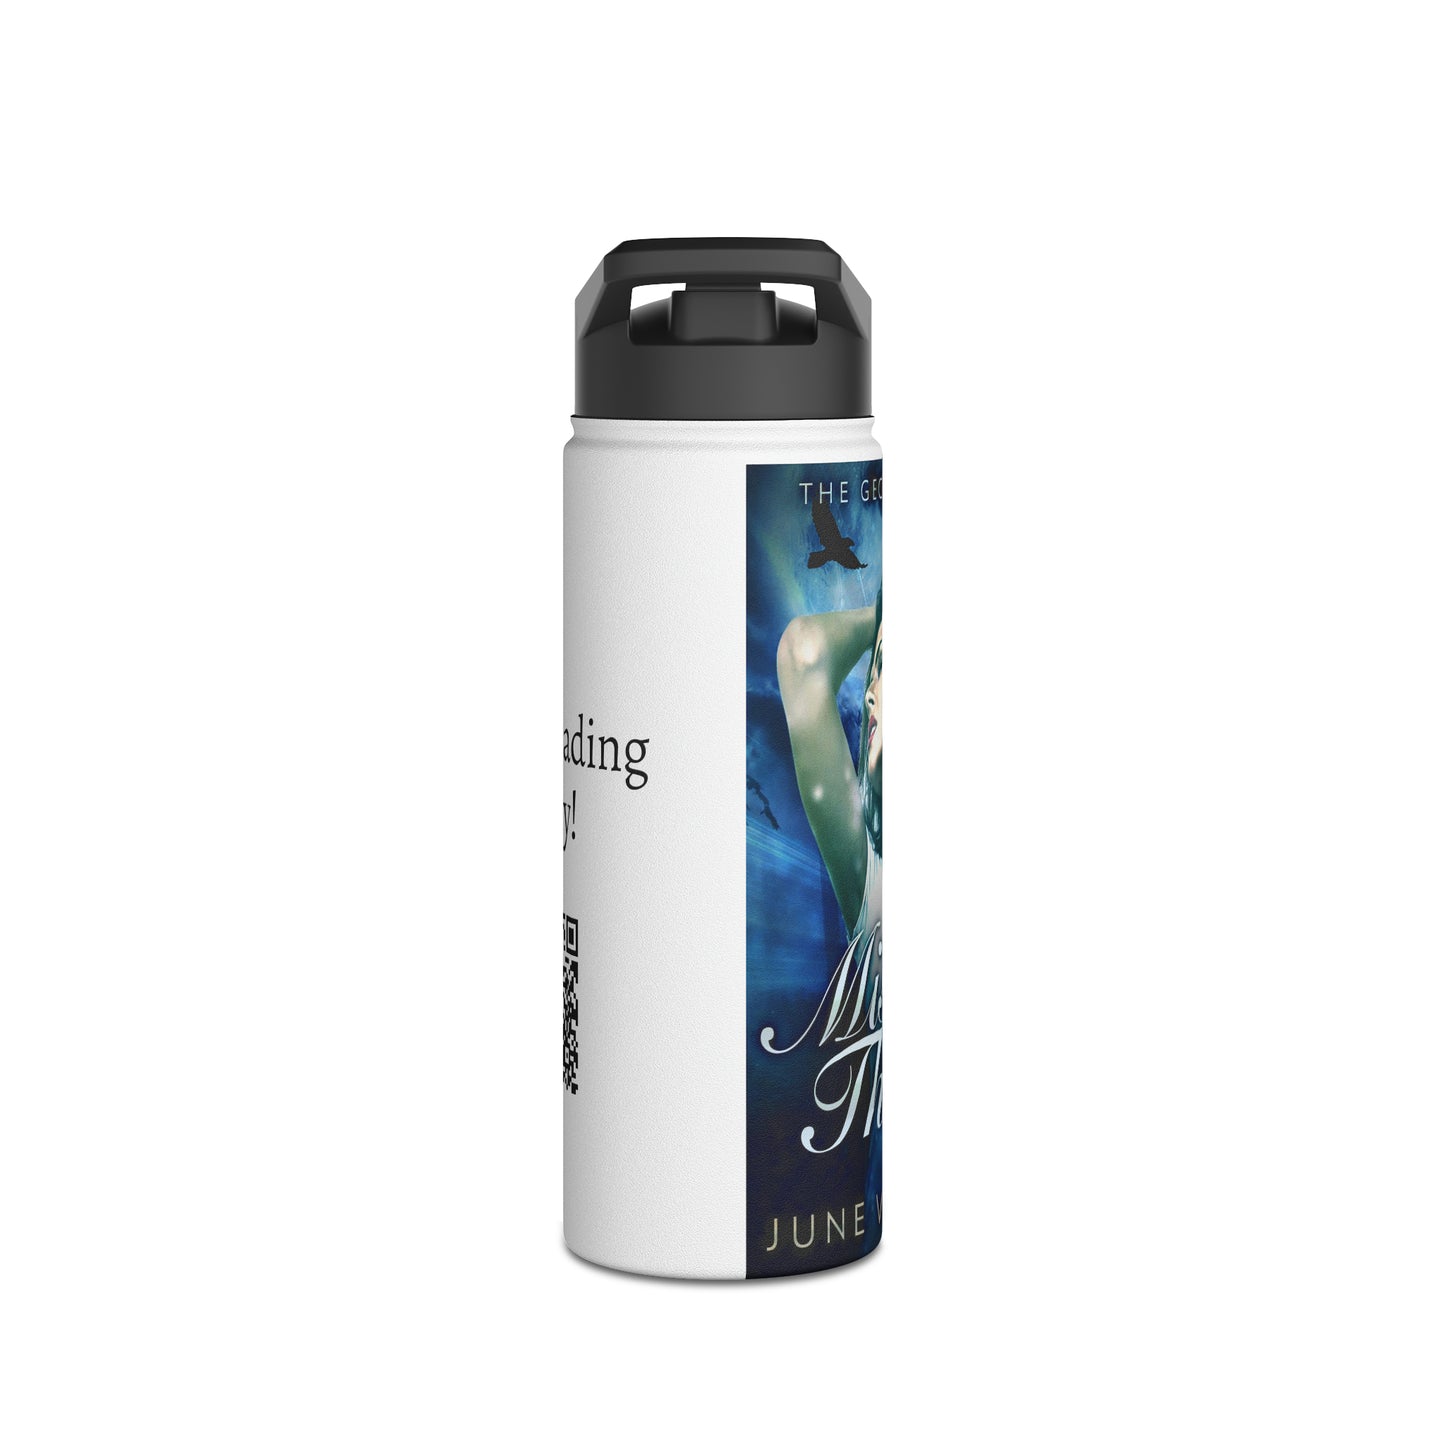 Missing Thread - Stainless Steel Water Bottle